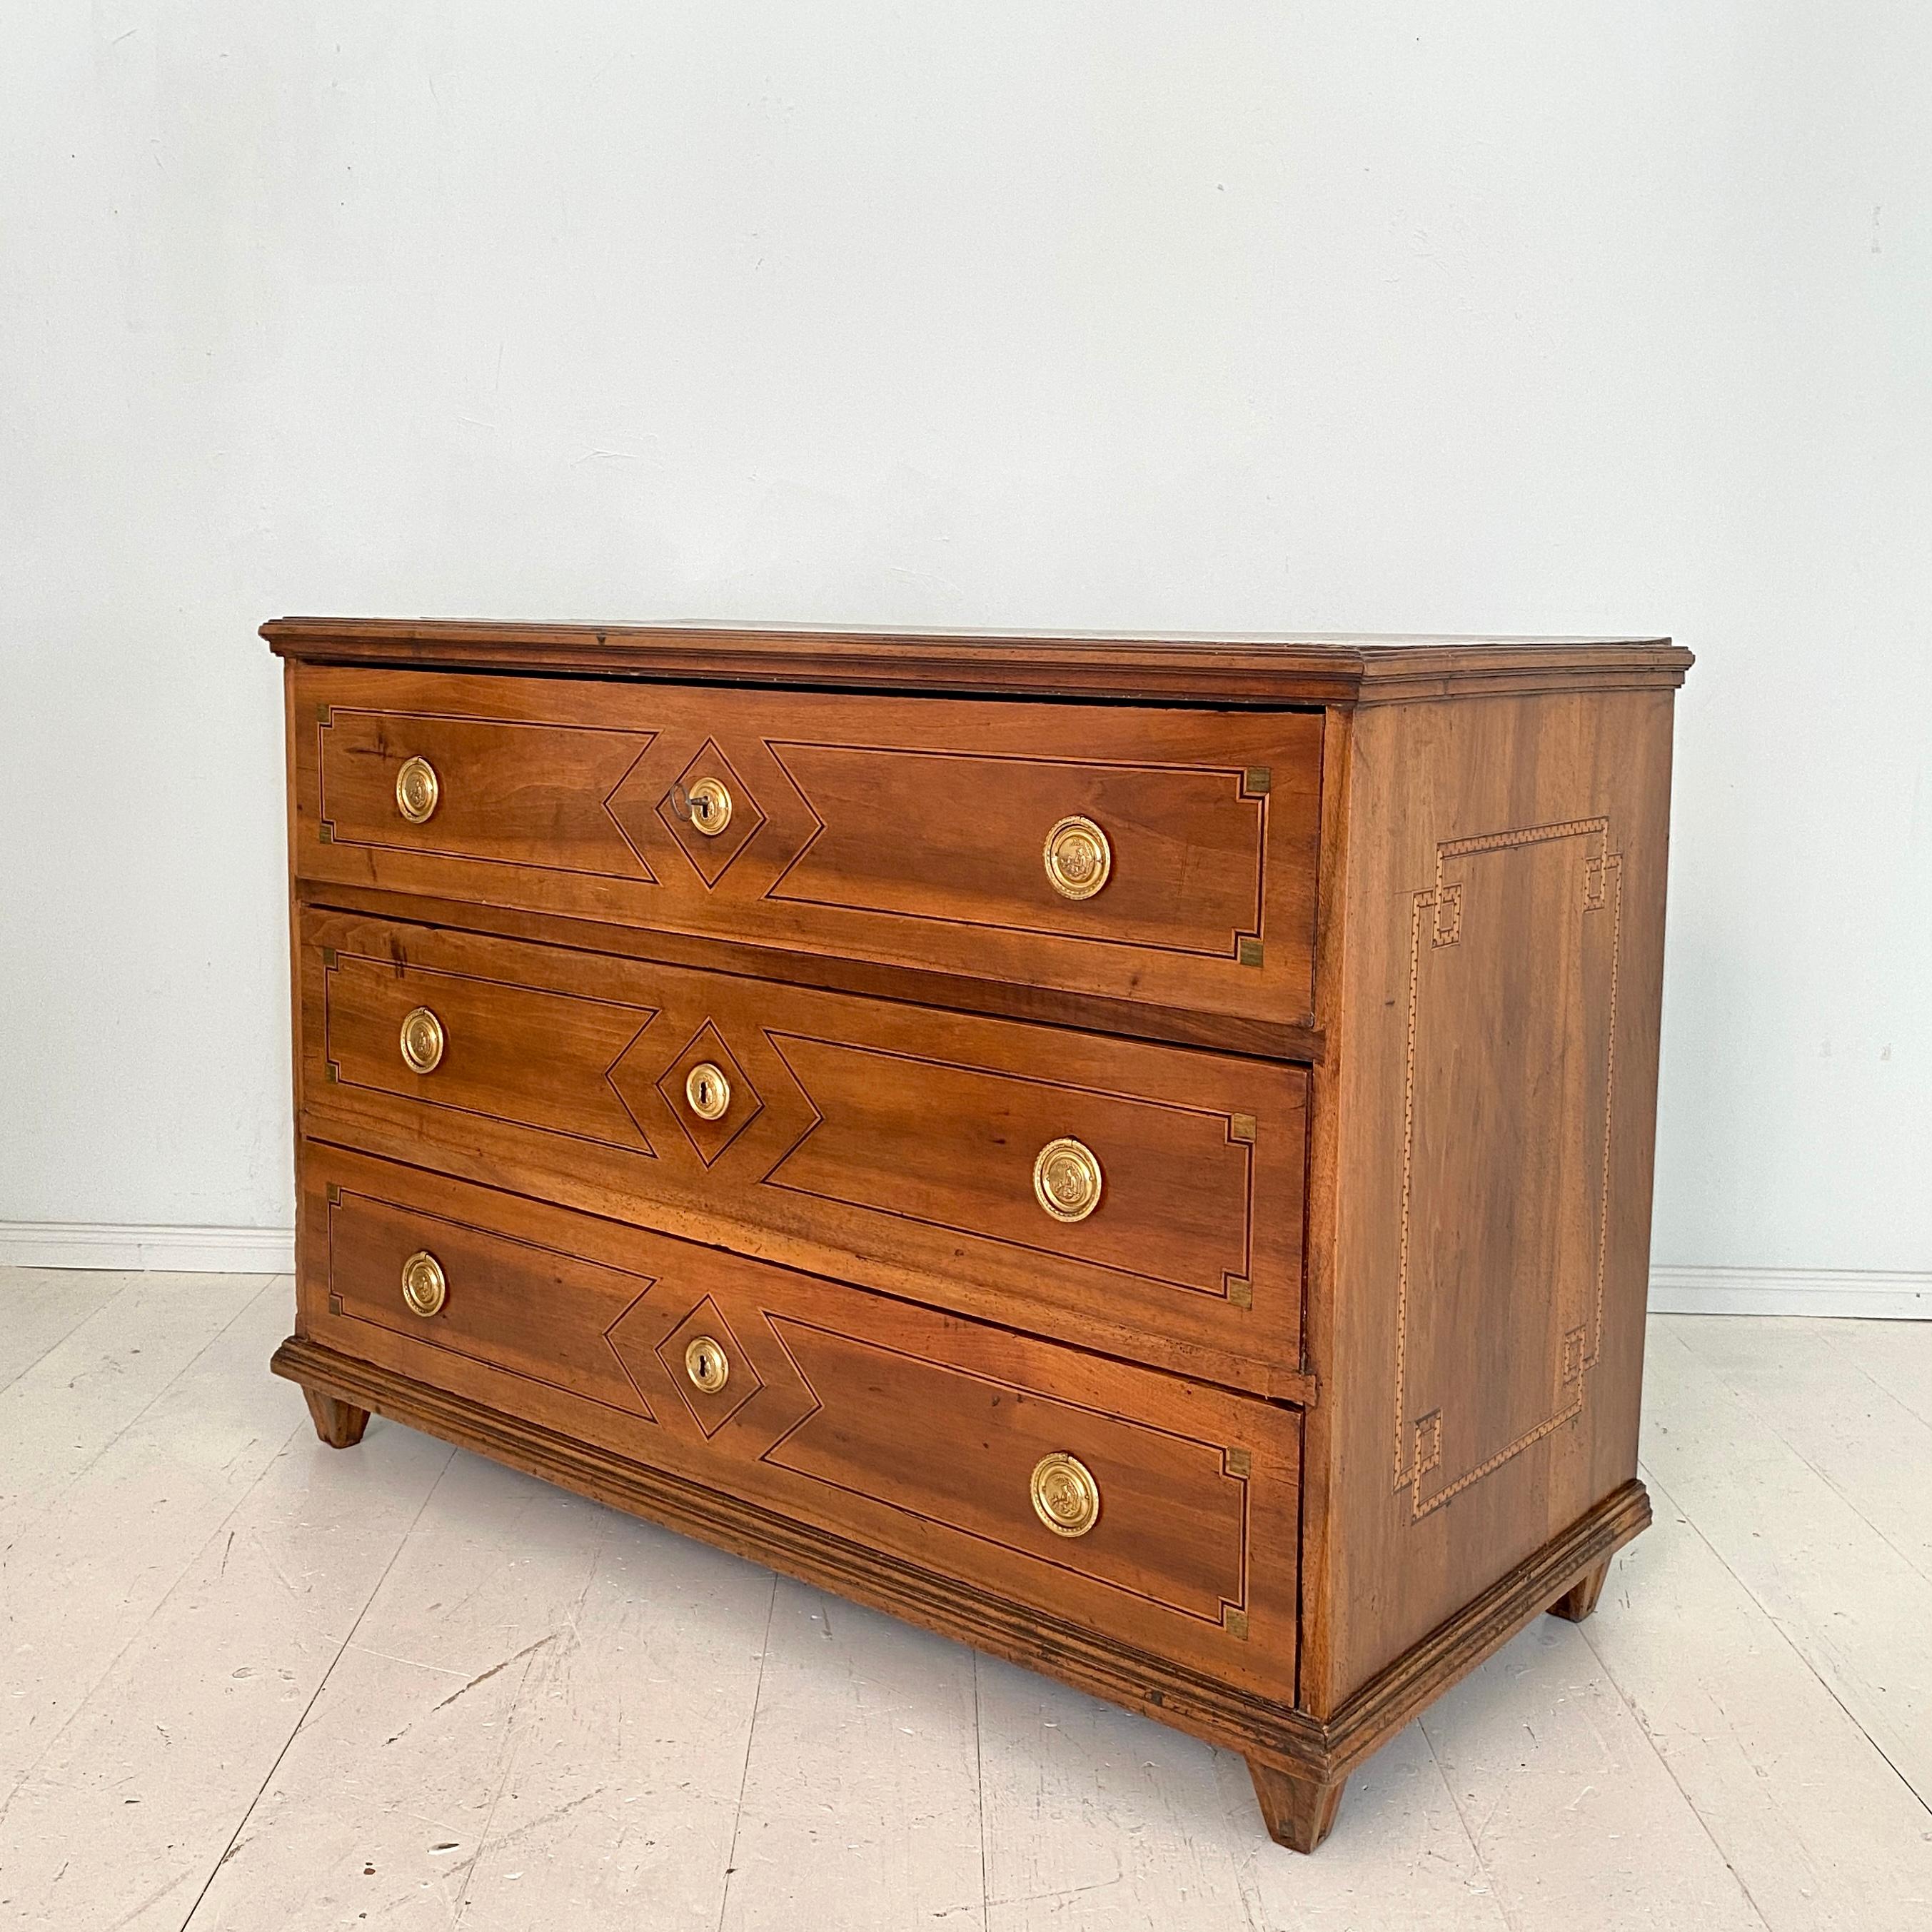 This 18th century German Louis XVI commode was build, circa 1780 in South Germany. The corpus of the chest is made out of solid walnut and the drawers out of pinewood. The Top and the Sides of the commode have got some great inlay banding . 
The